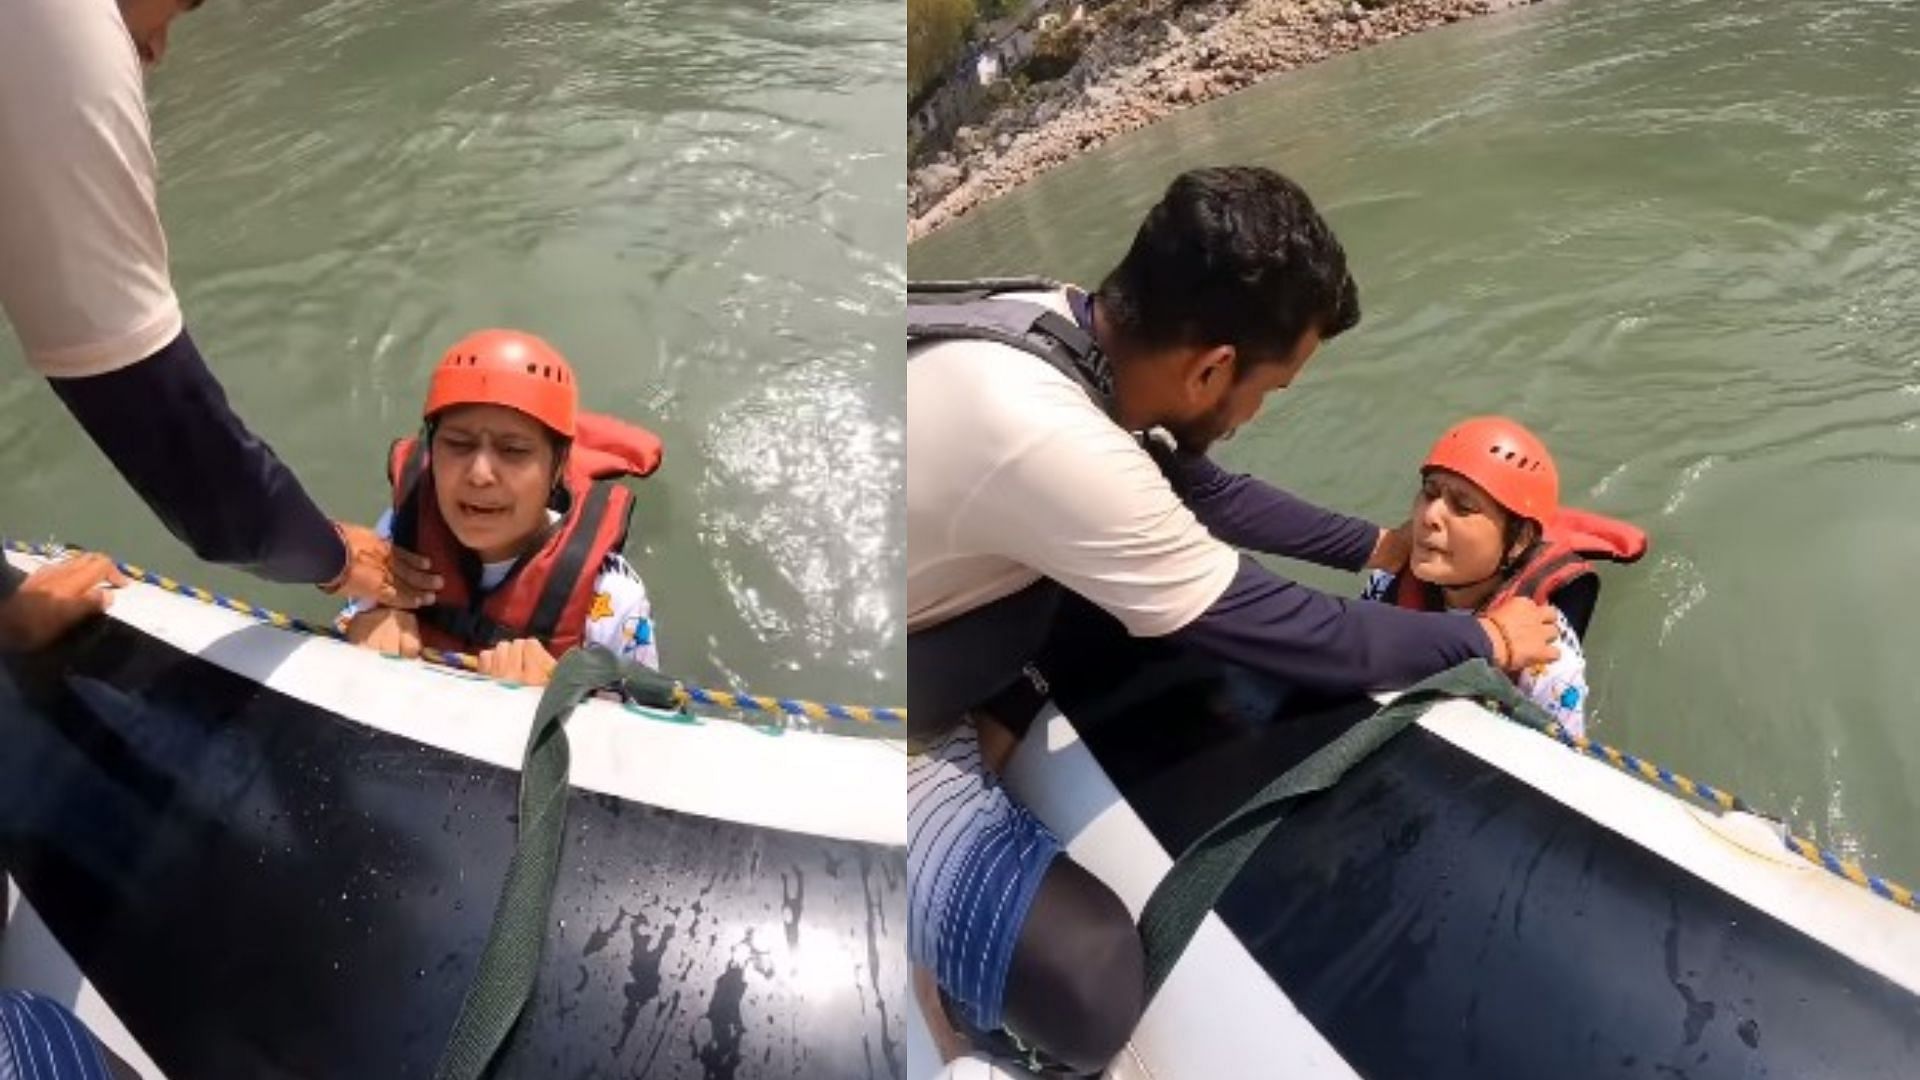 Woman pleads to lift her back on boat during river rafting said Uppar Lelo video viral